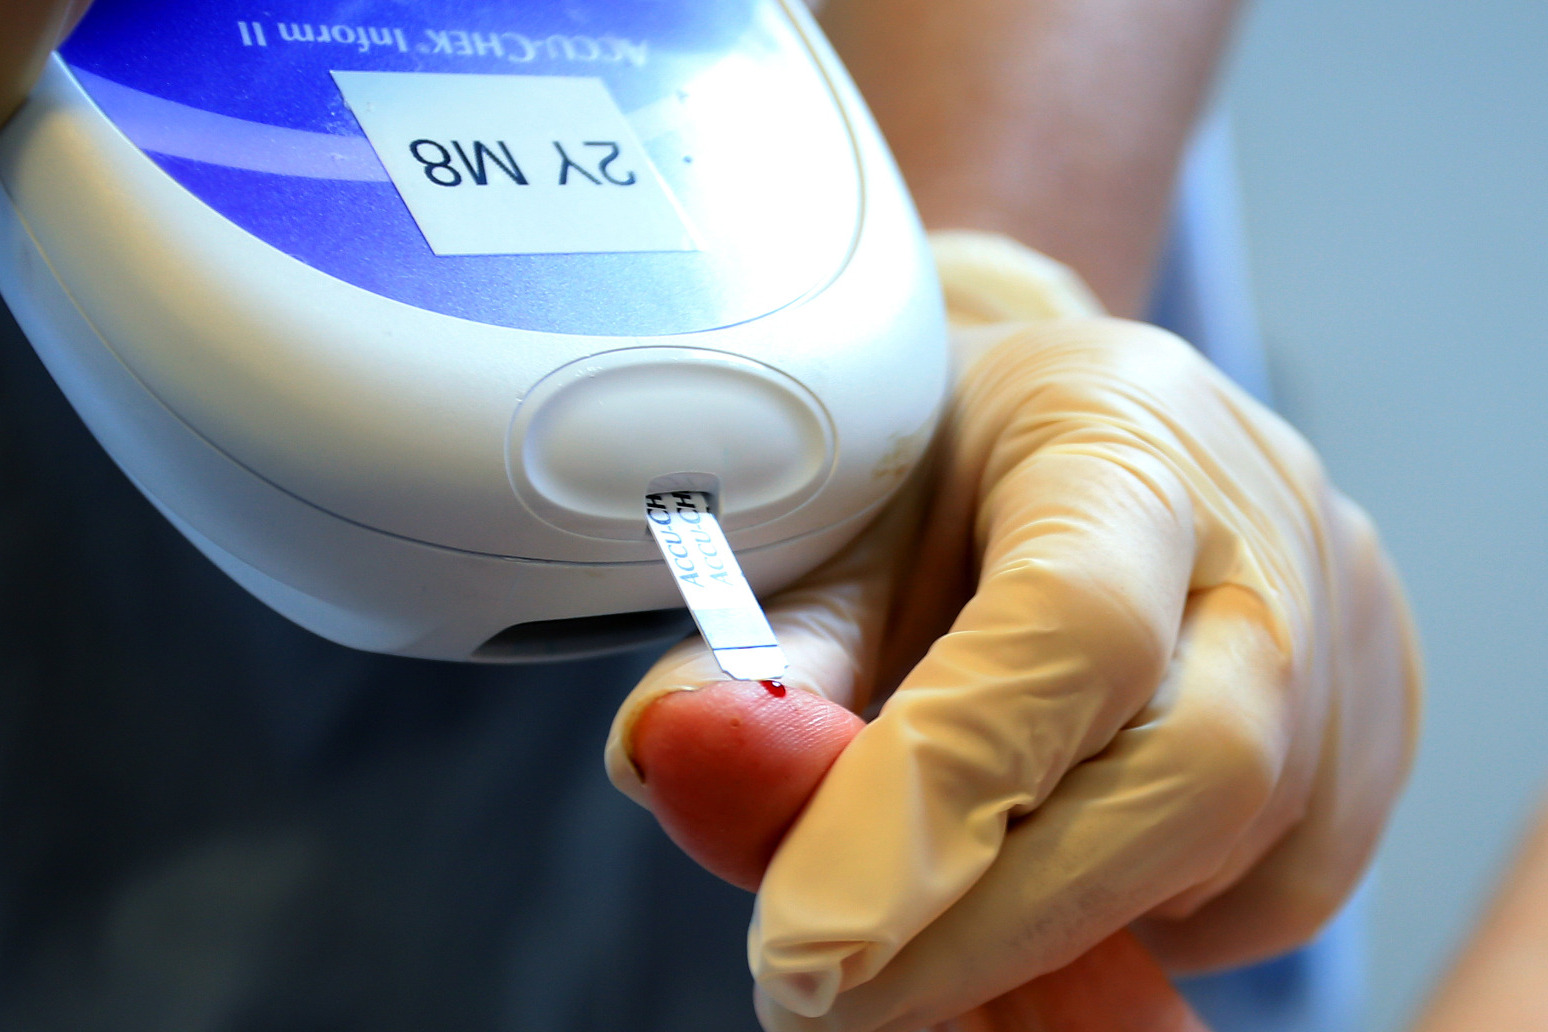 Almost one in 10 Britons will have diabetes by 2030 